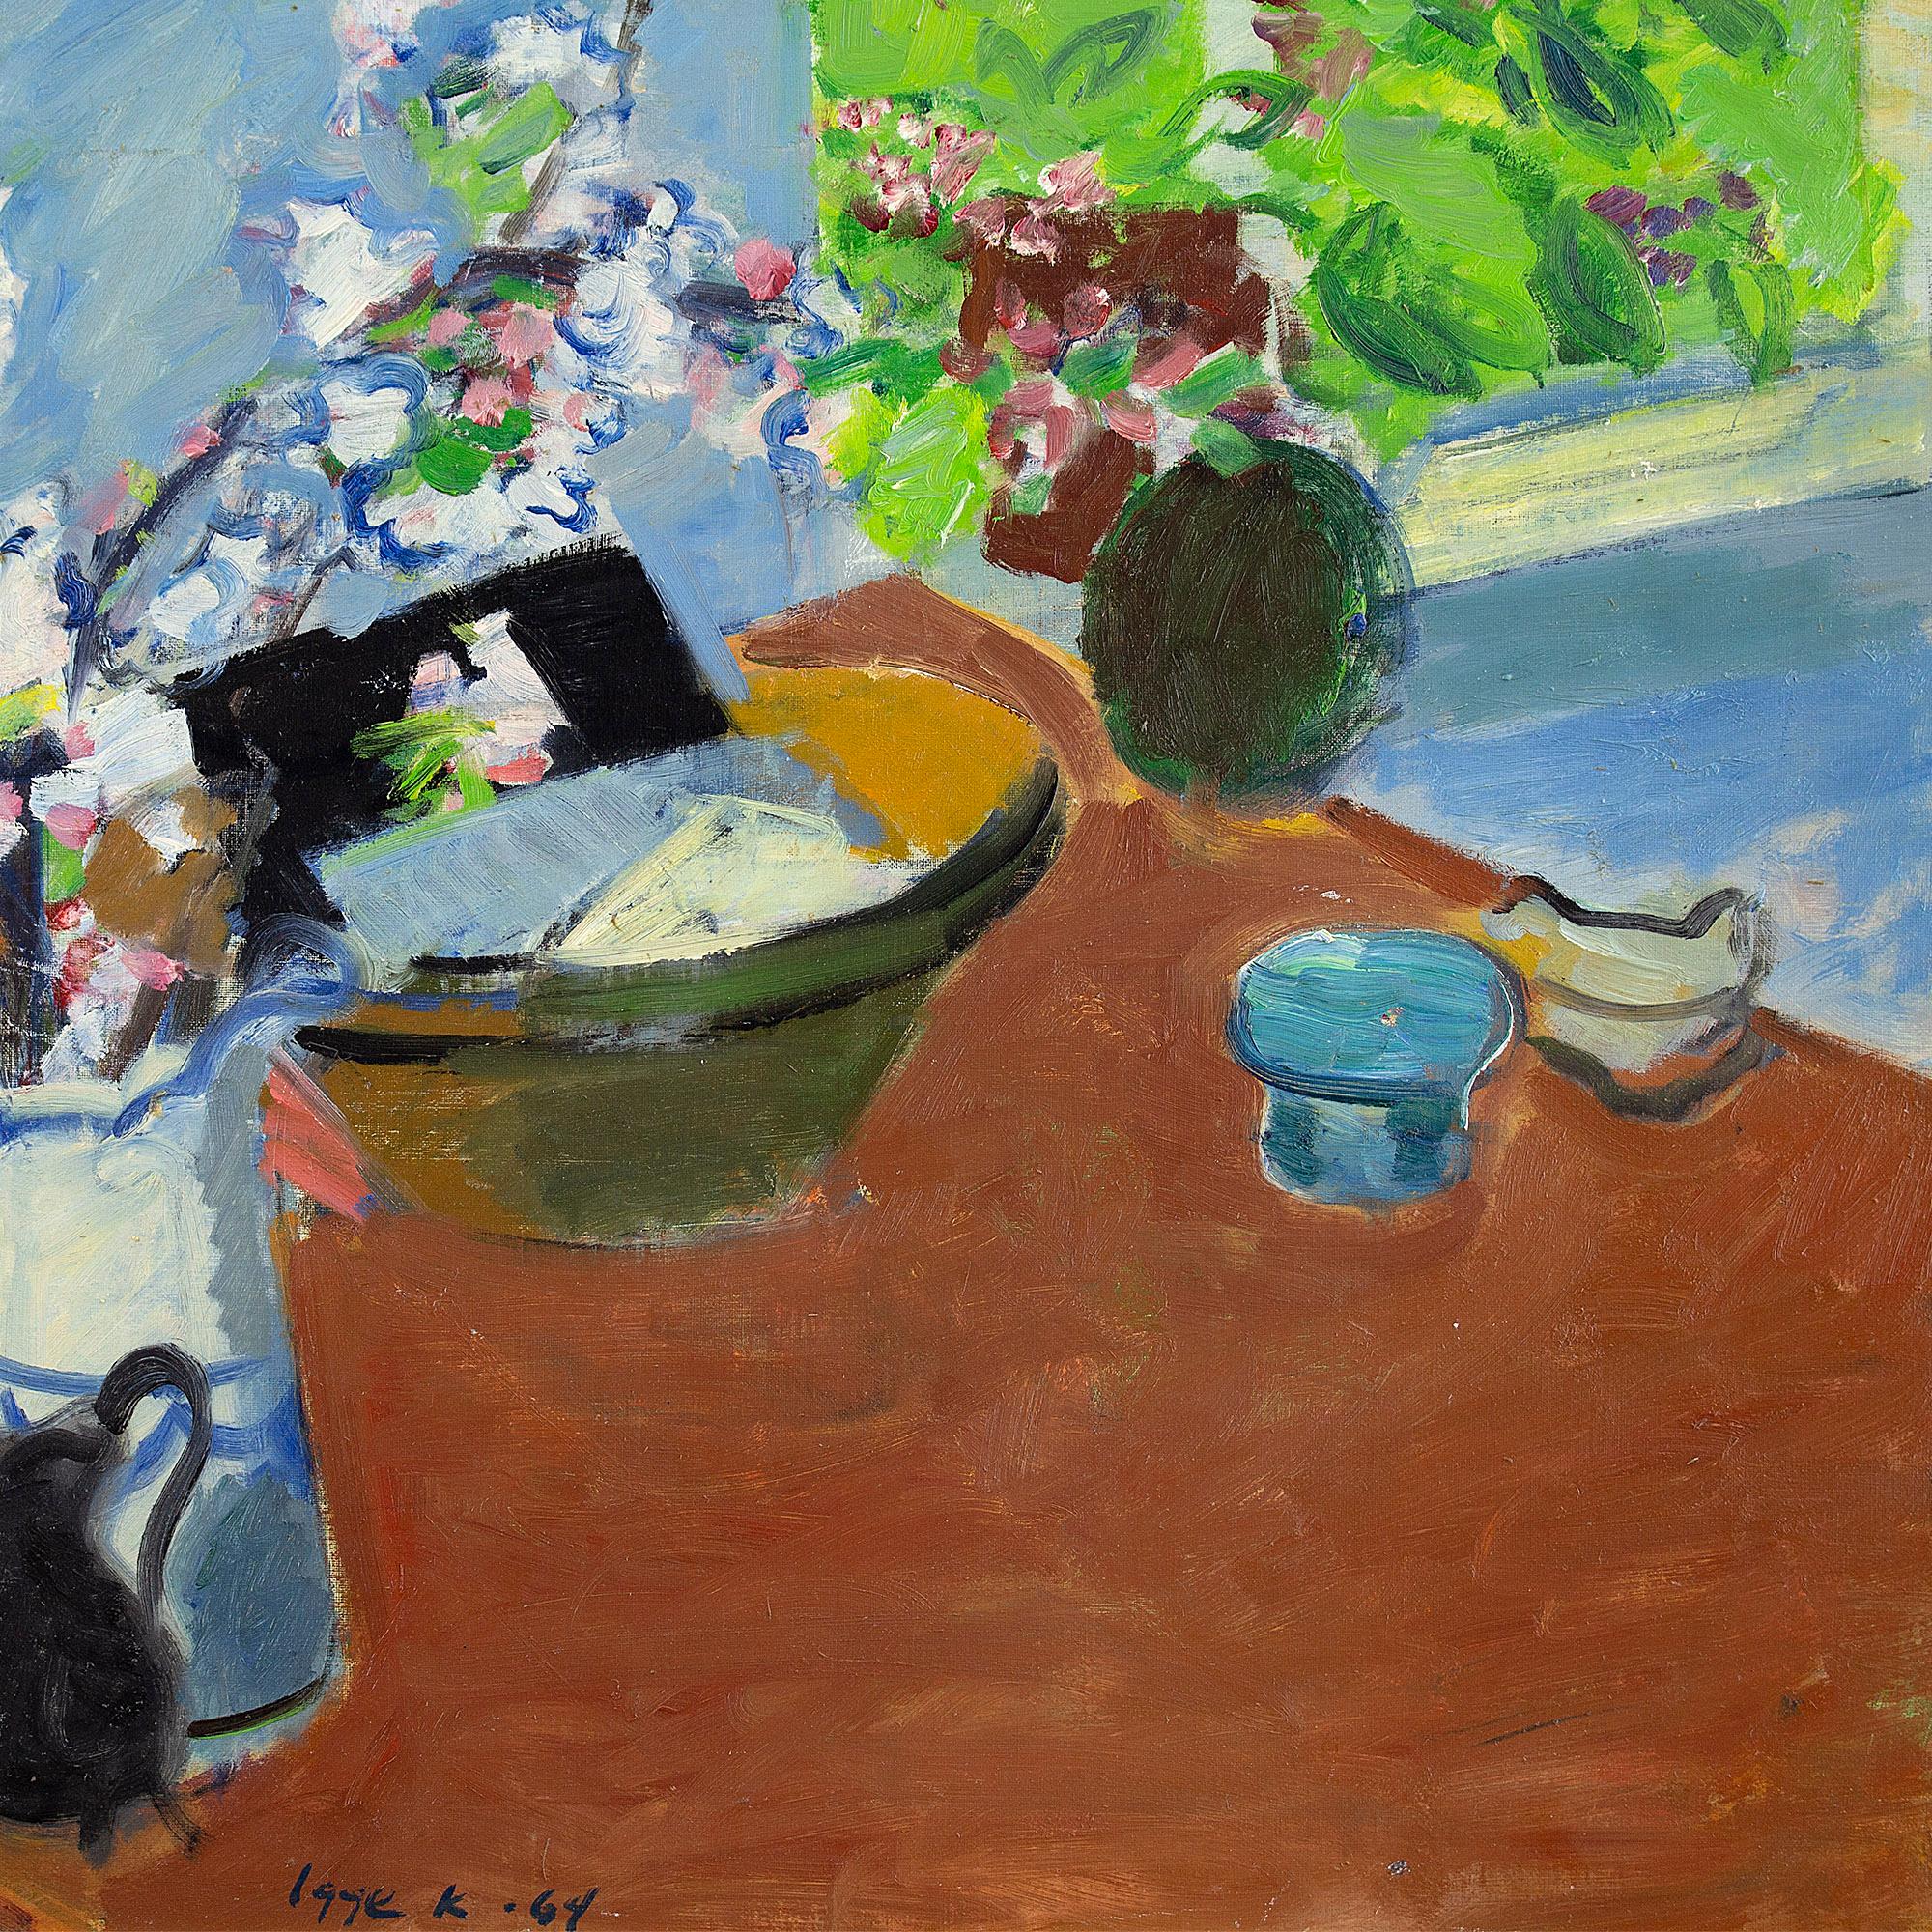 This mid-century still life by Swedish artist Igge Karlsson depicts a table with various ceramics and a branch of blossom from a flowering crabapple tree. It’s a highly decorative arrangement.

Karlsson trained at the Royal College of Art and the